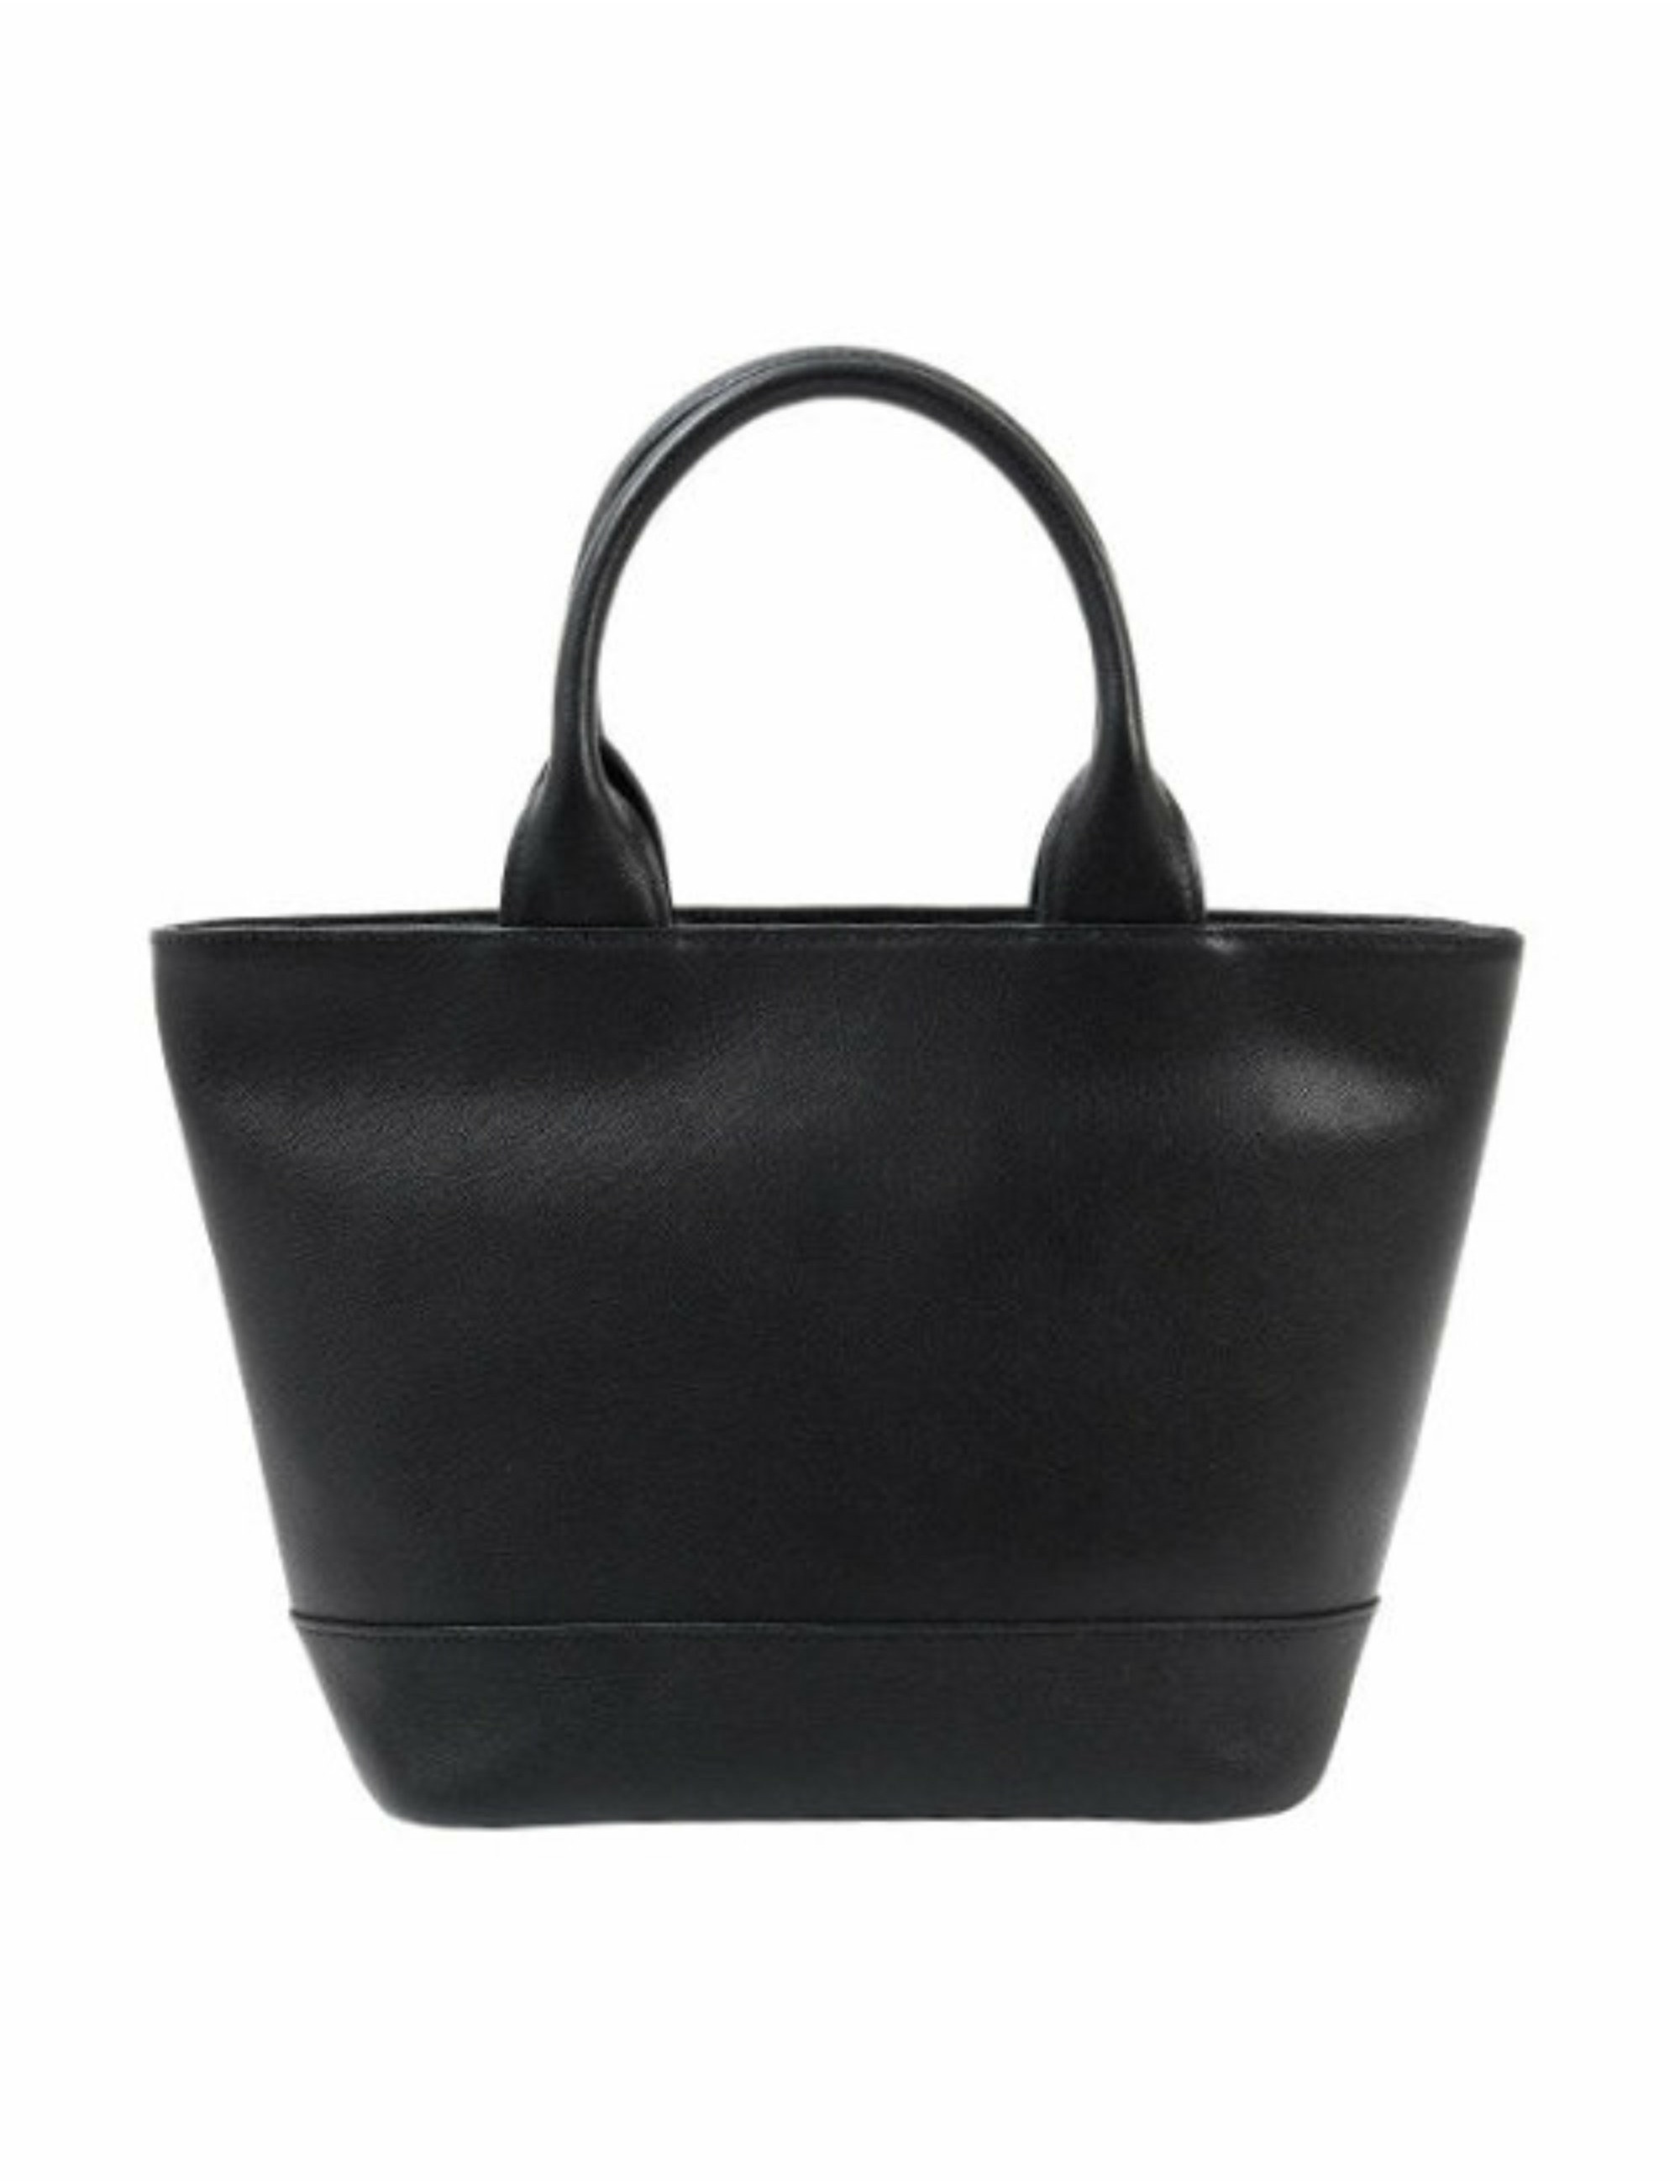 LEATHER MINI TOTE BAG / レザーミニトートバッグ